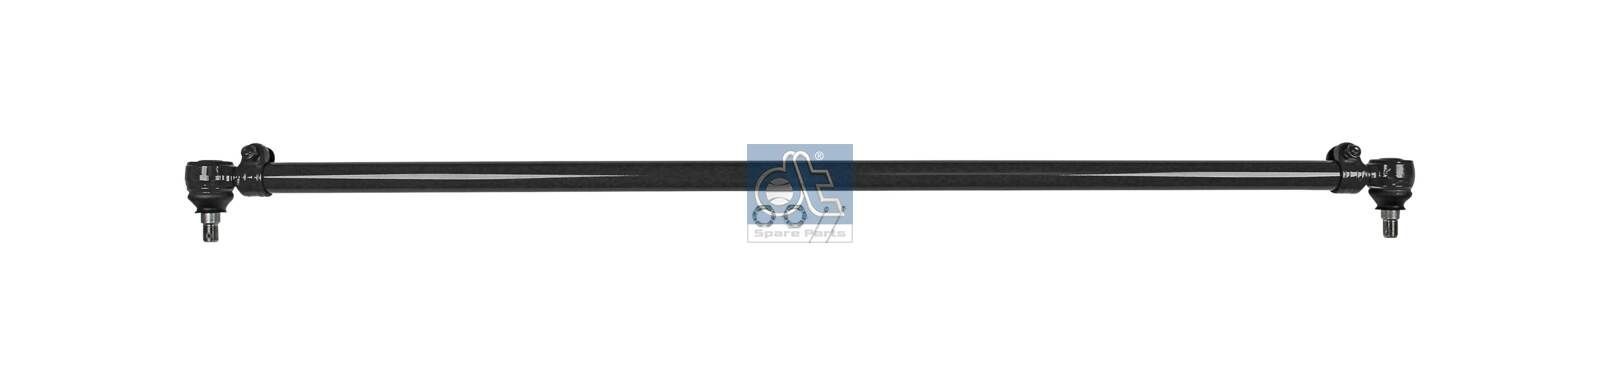 DT Spare Parts 6.53016 Rod Assembly 50 00 613 837